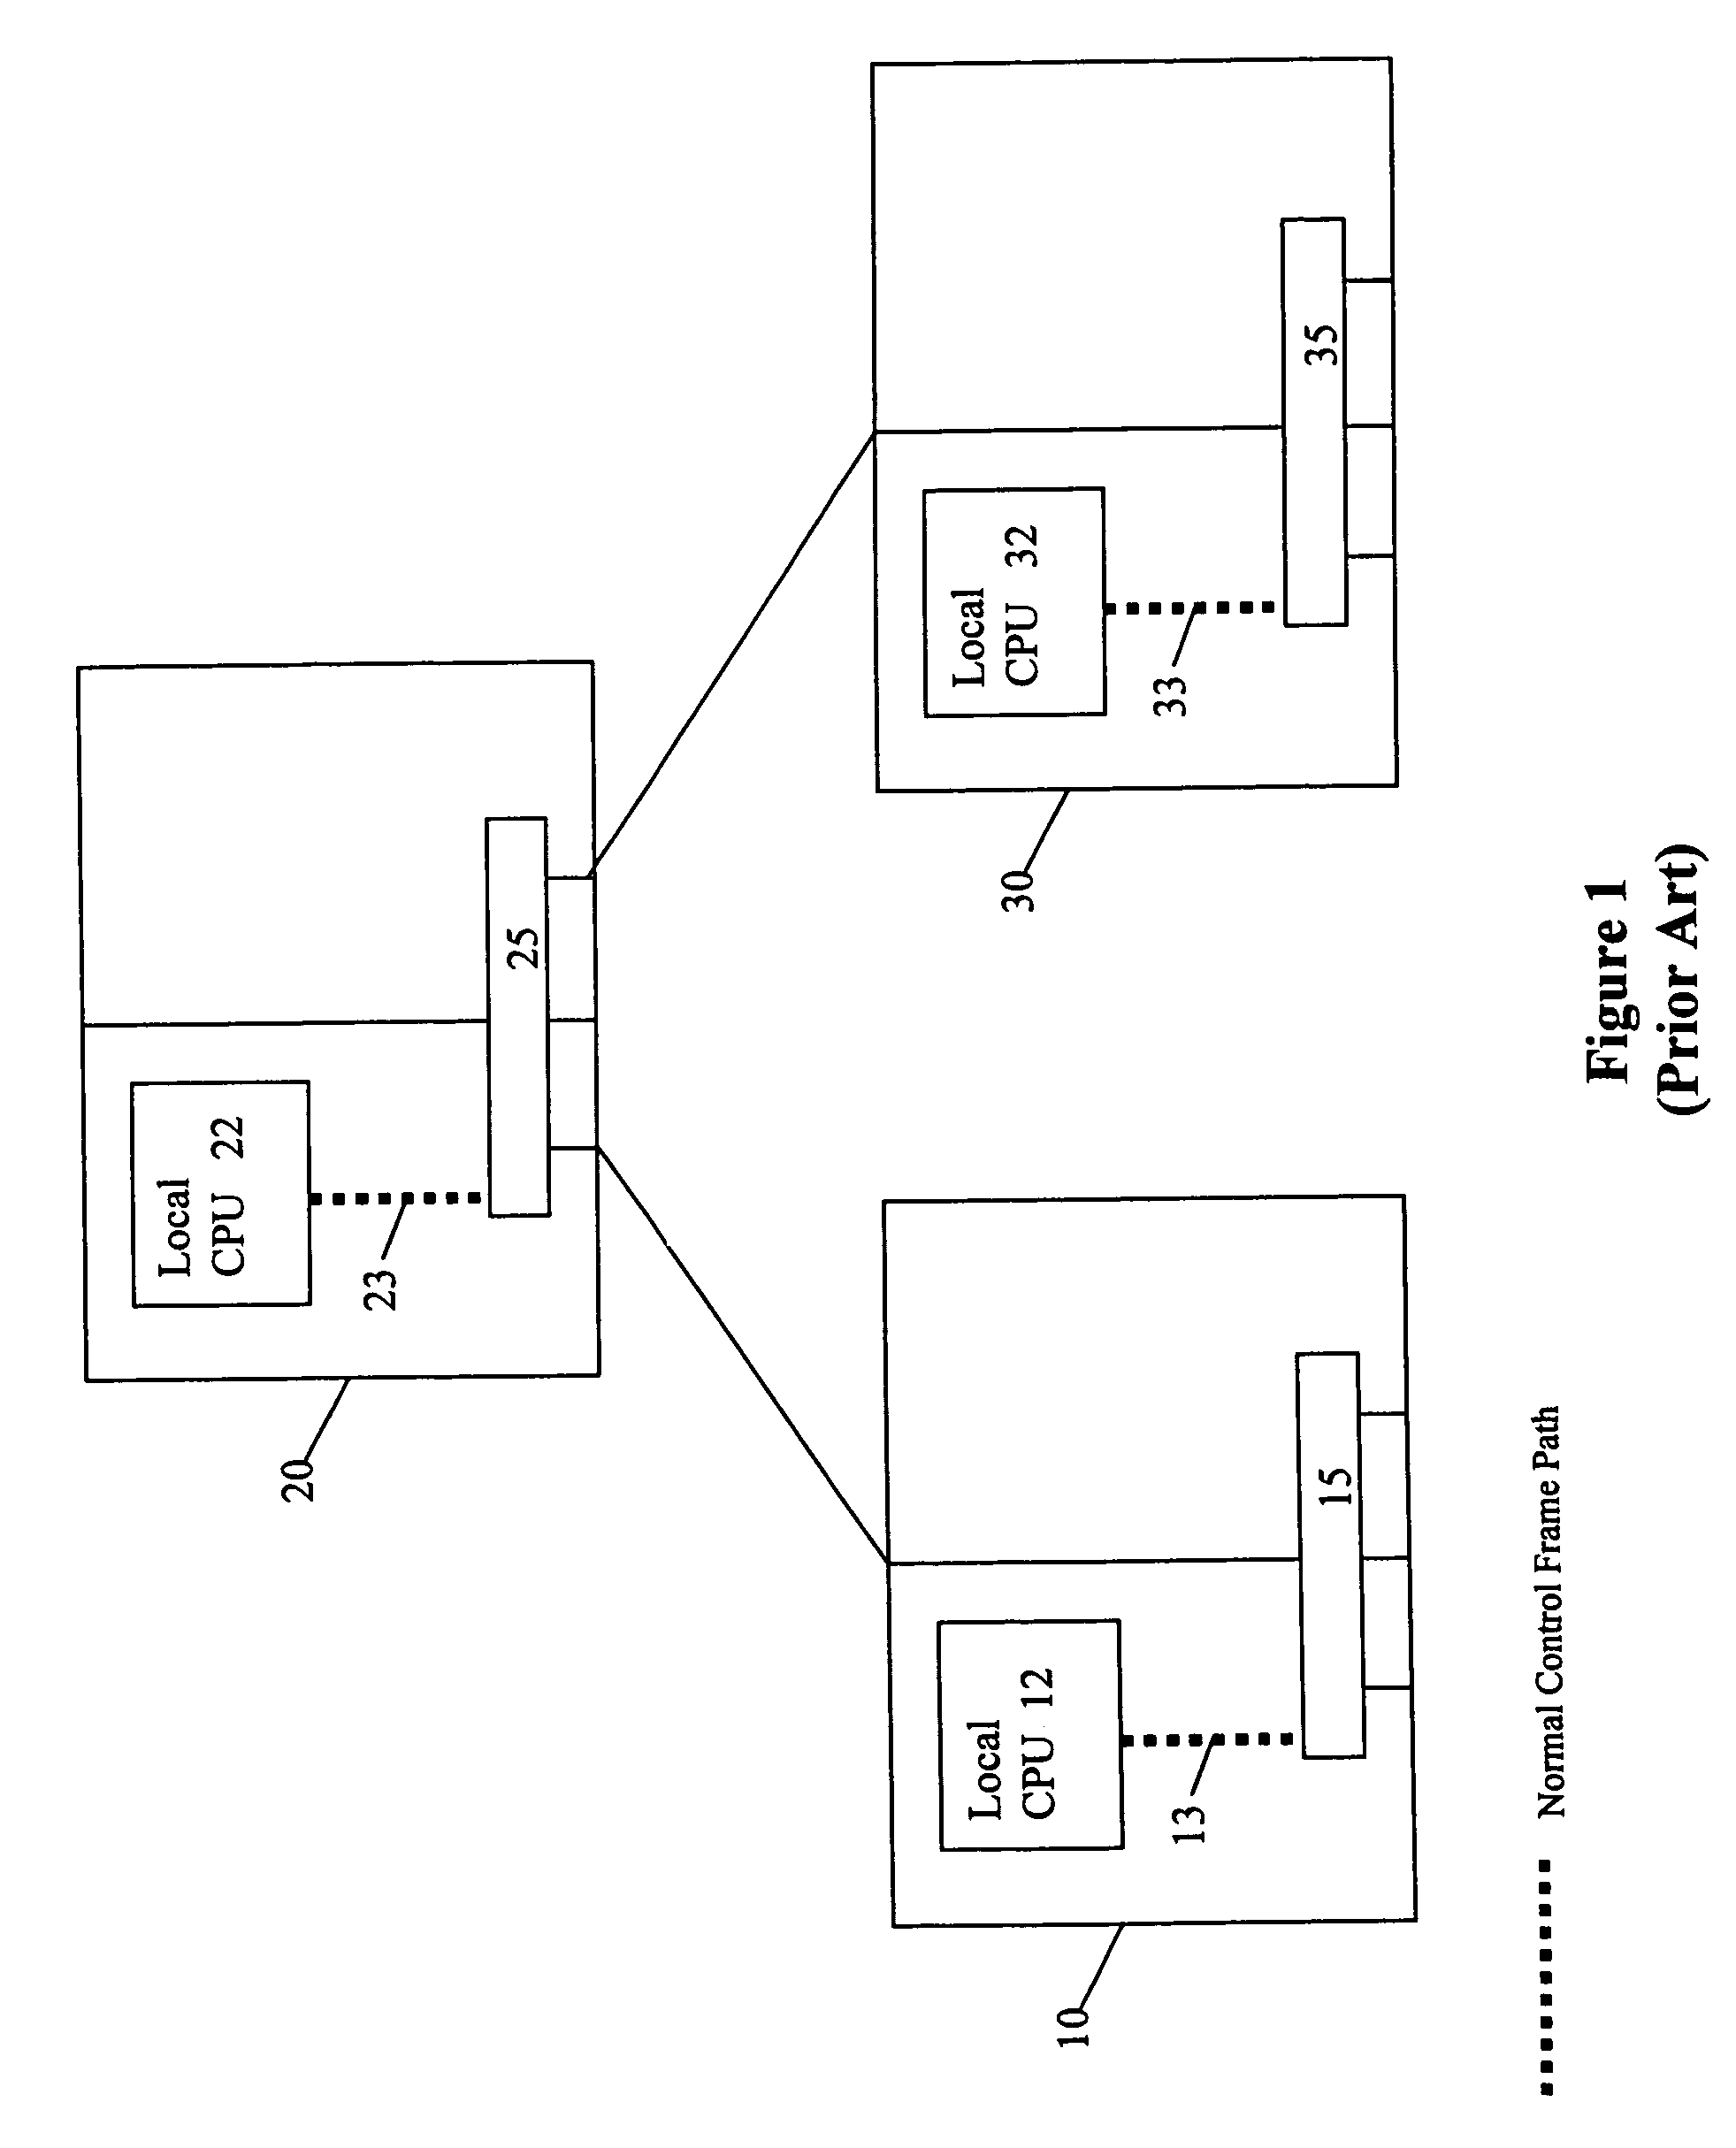 Distributed switch/router silicon engine